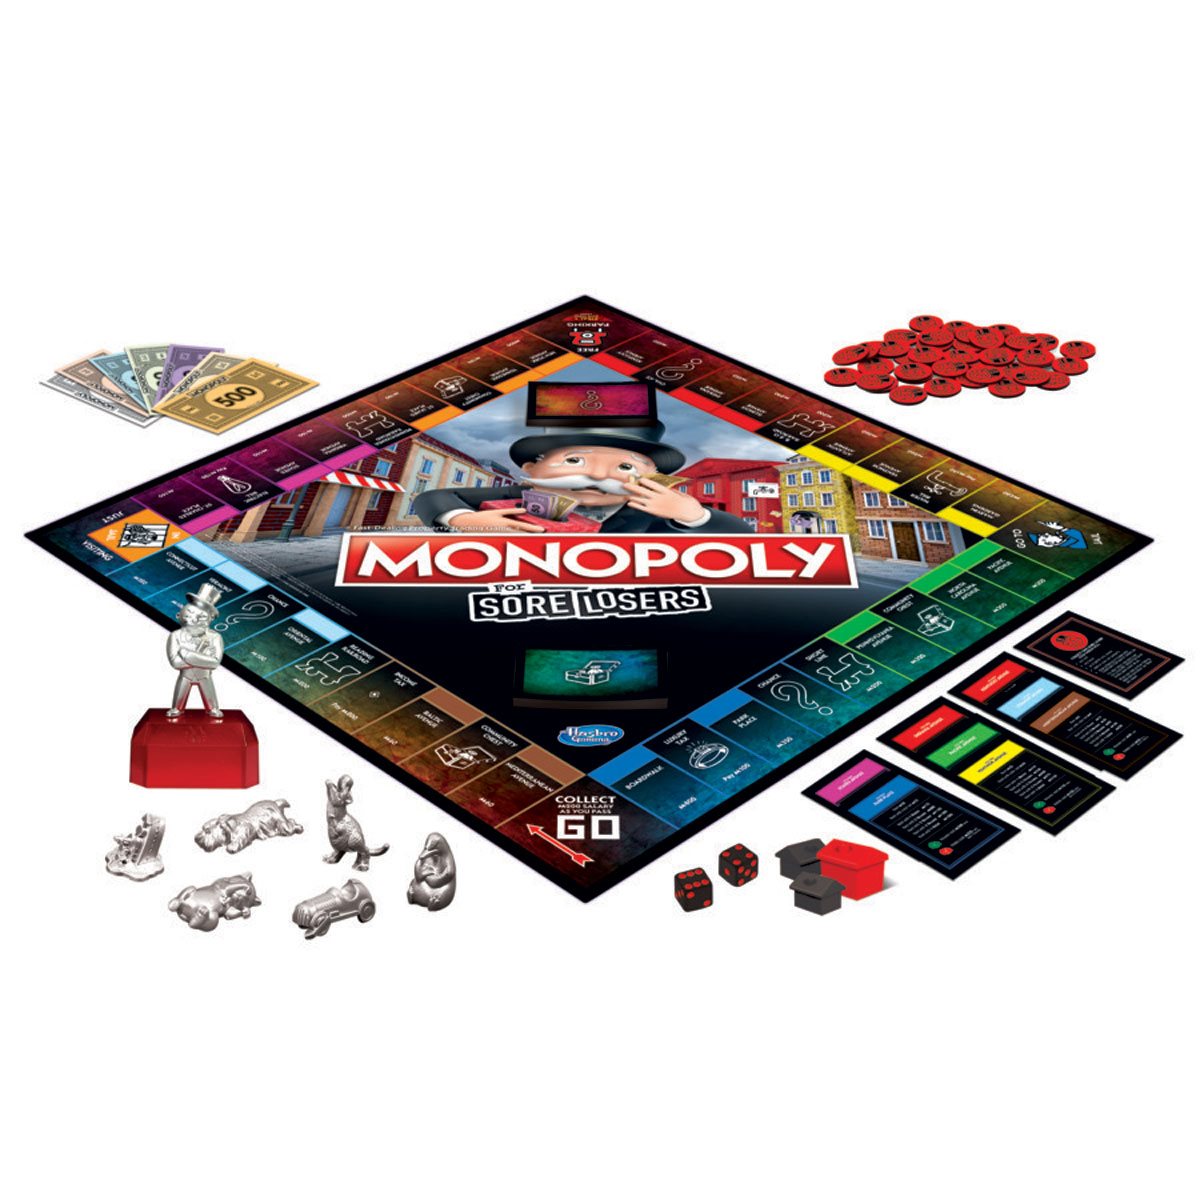 Monopoly for Sore Losers Board Game - Entertainment Earth